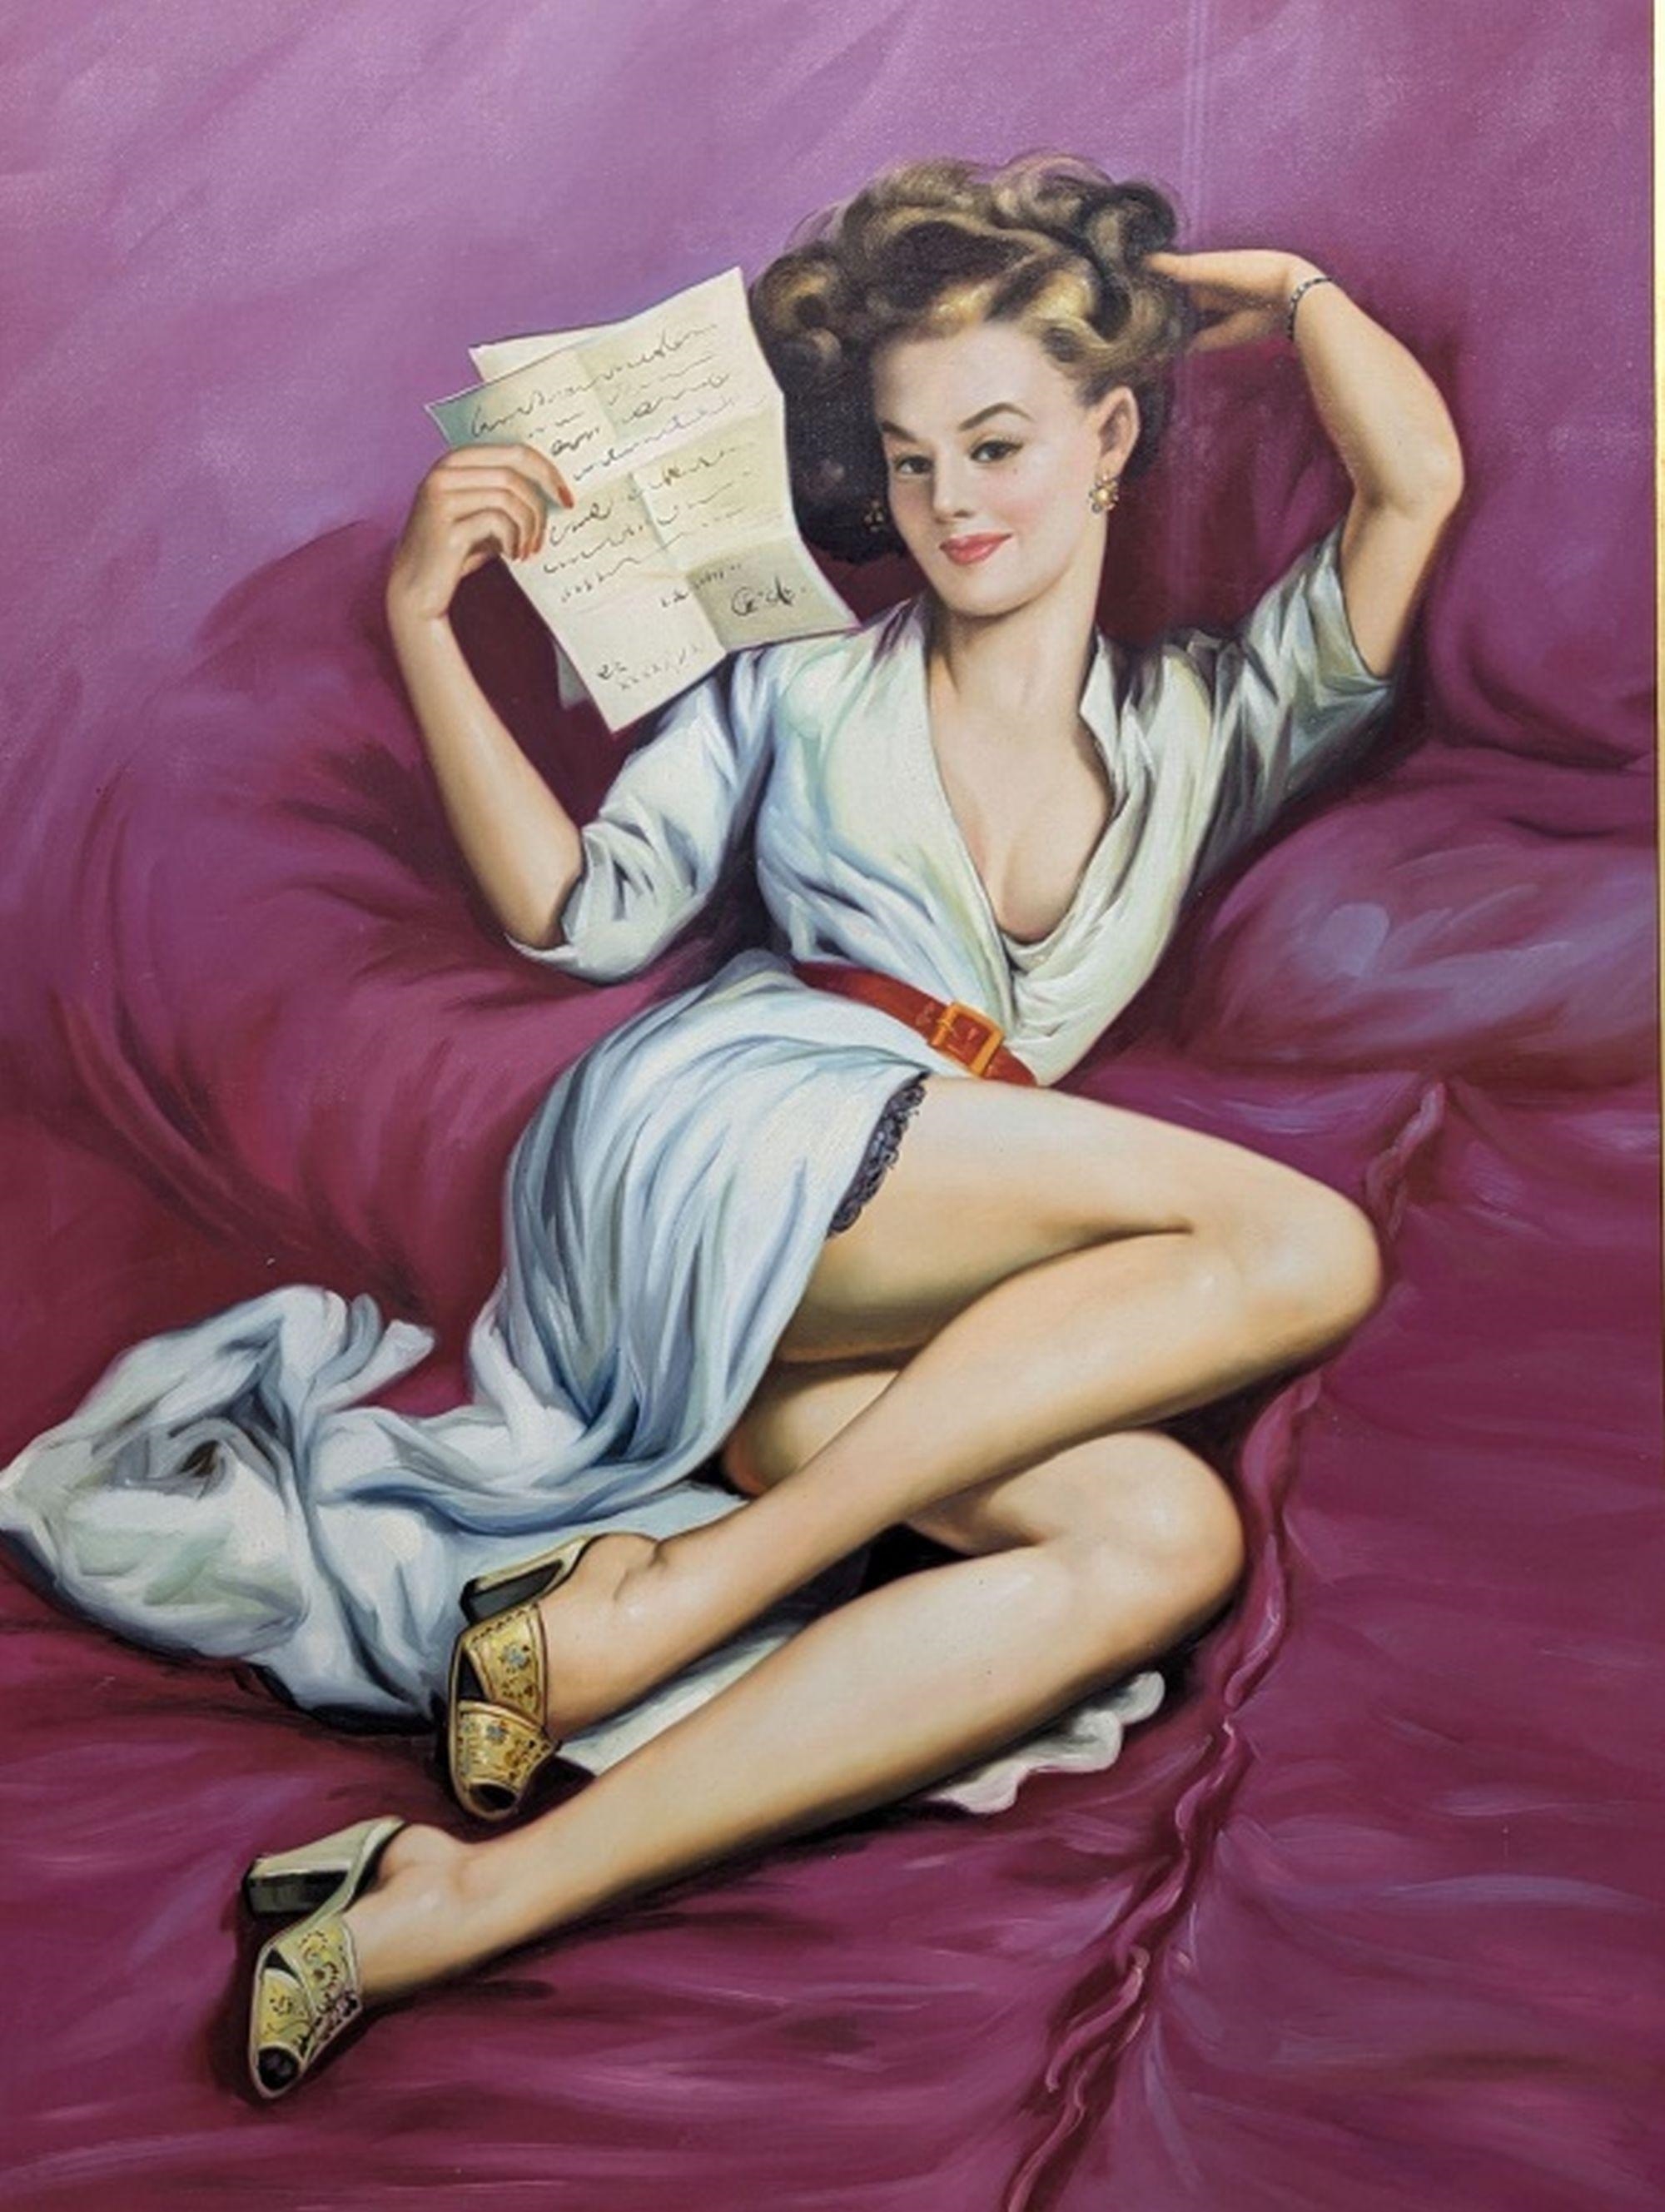 Artwork by Gil Elvgren, Pin-up girl, Made of Acrylic on canvas